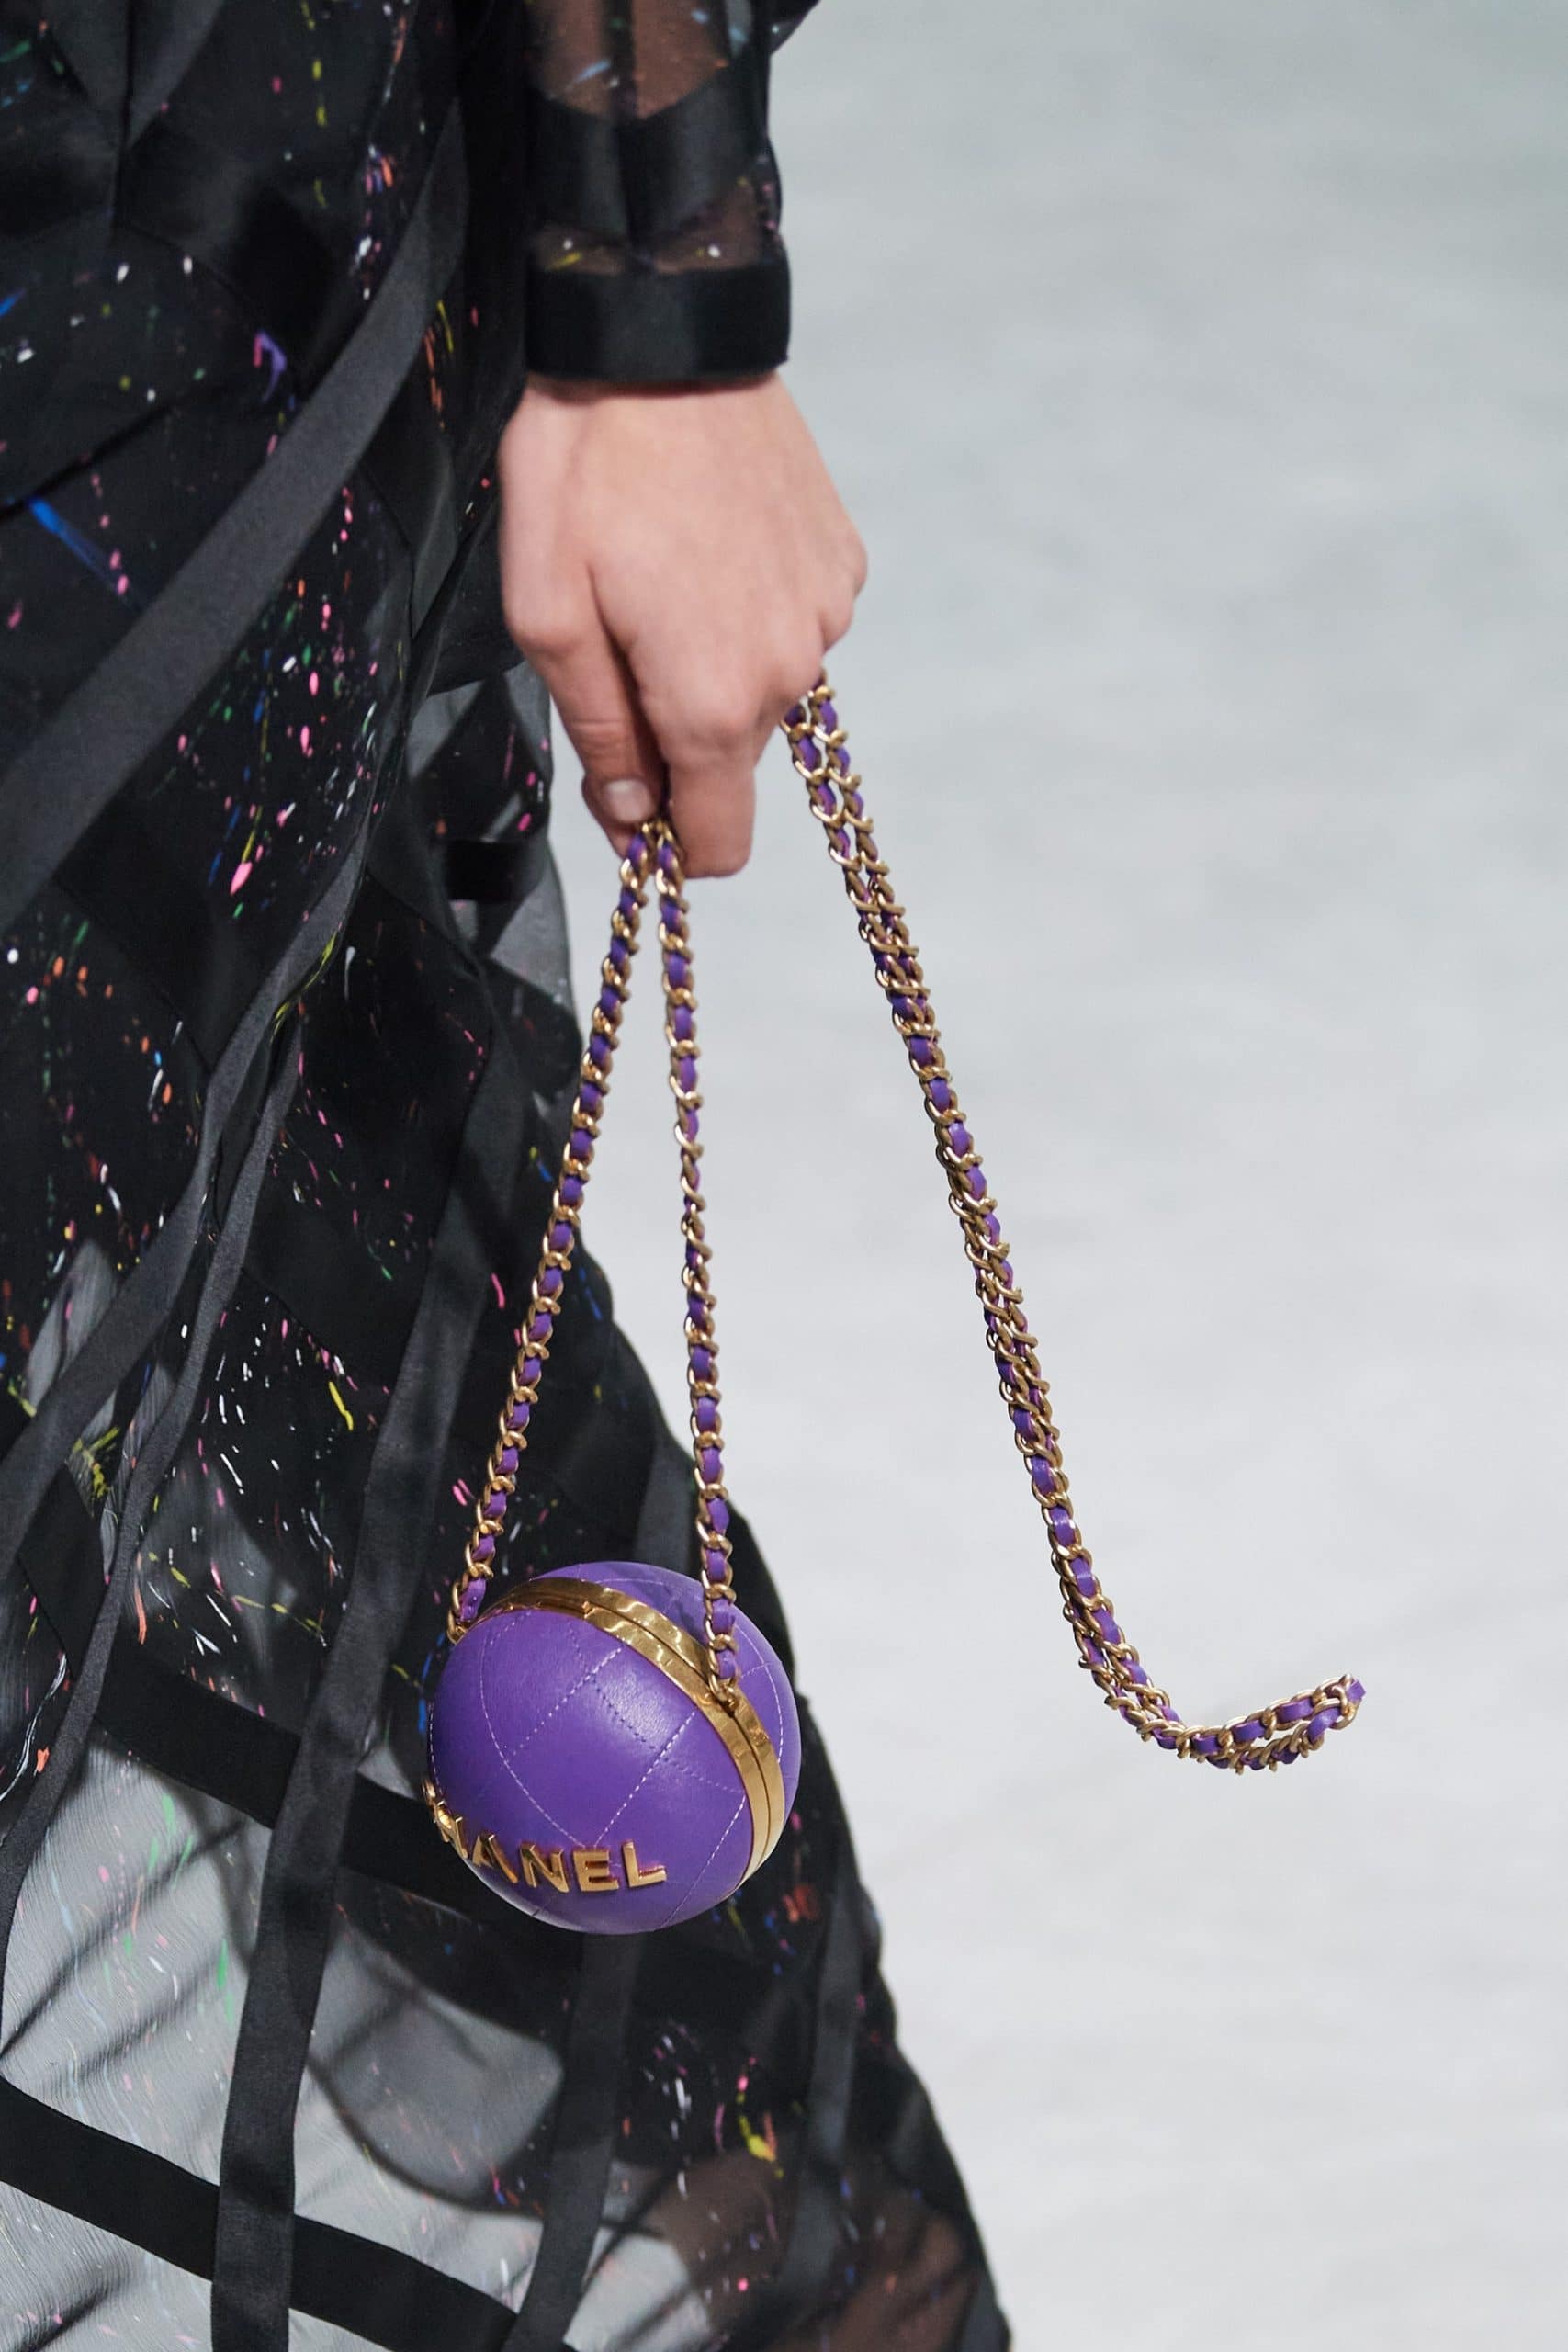 Meet the CHANEL 22 Bag — a new design presented at the Spring